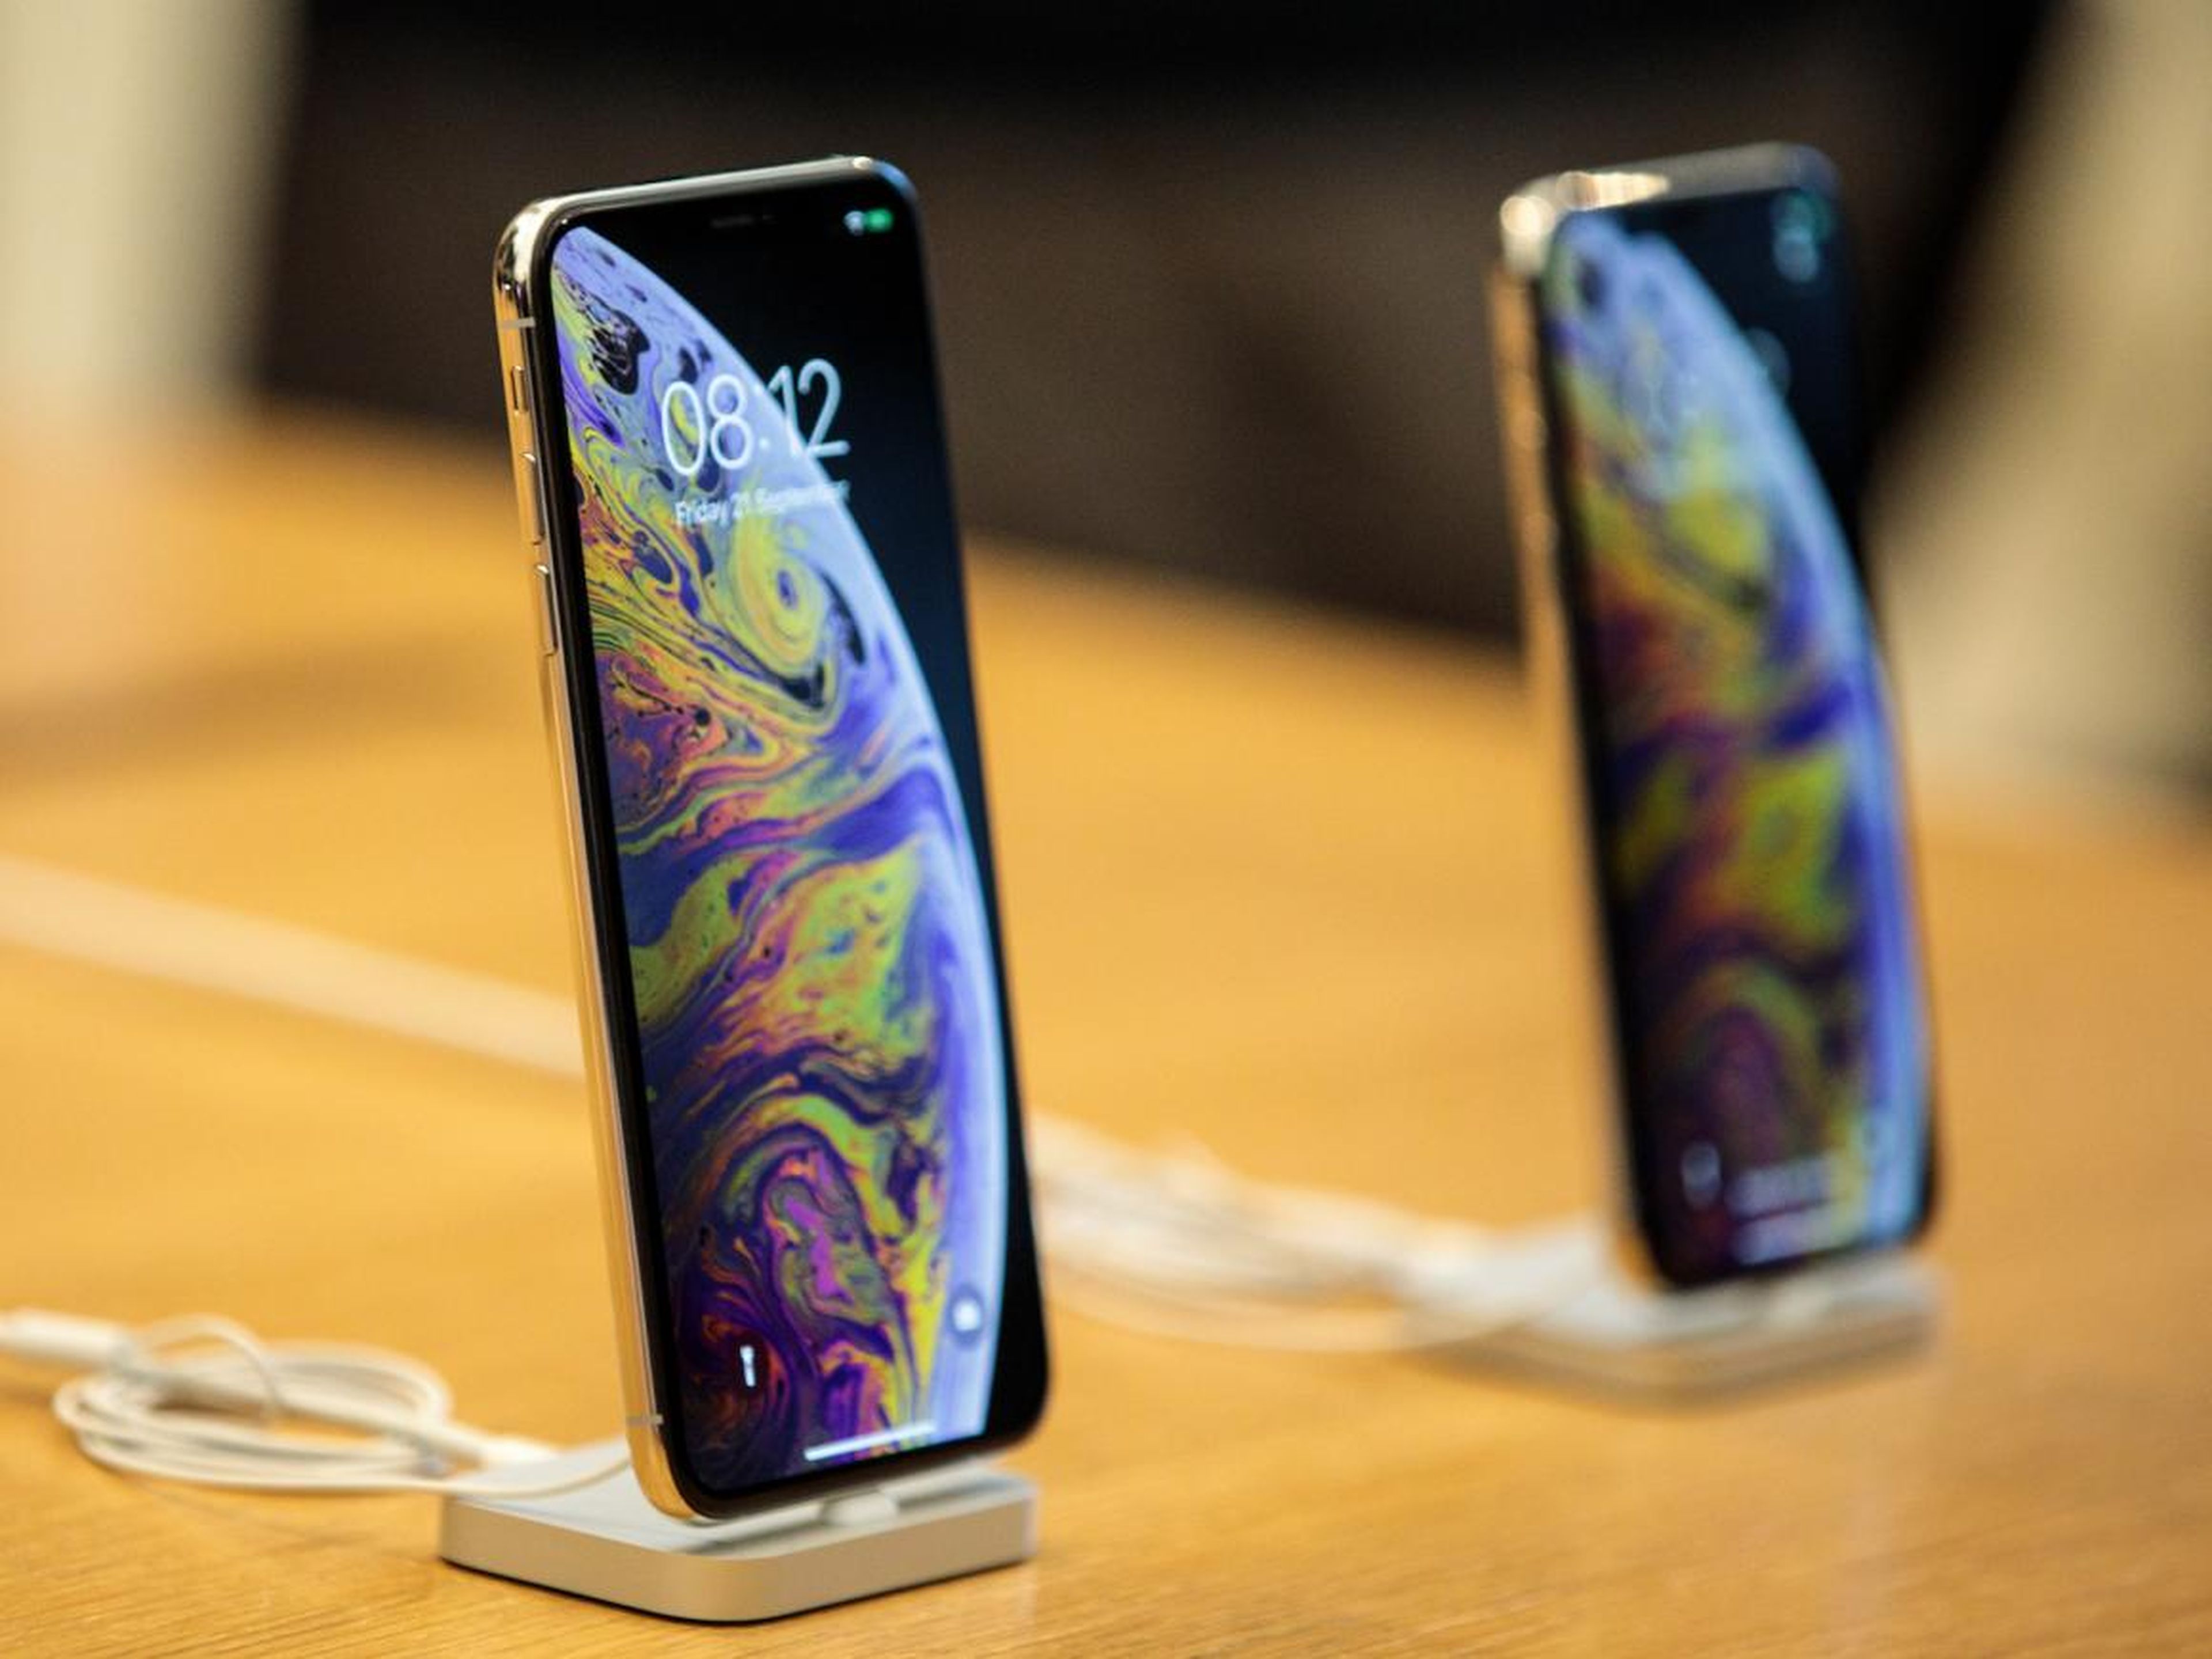 The differences between the iPhone X and iPhone XS are minor, but there are still a few things that set the new phone apart.